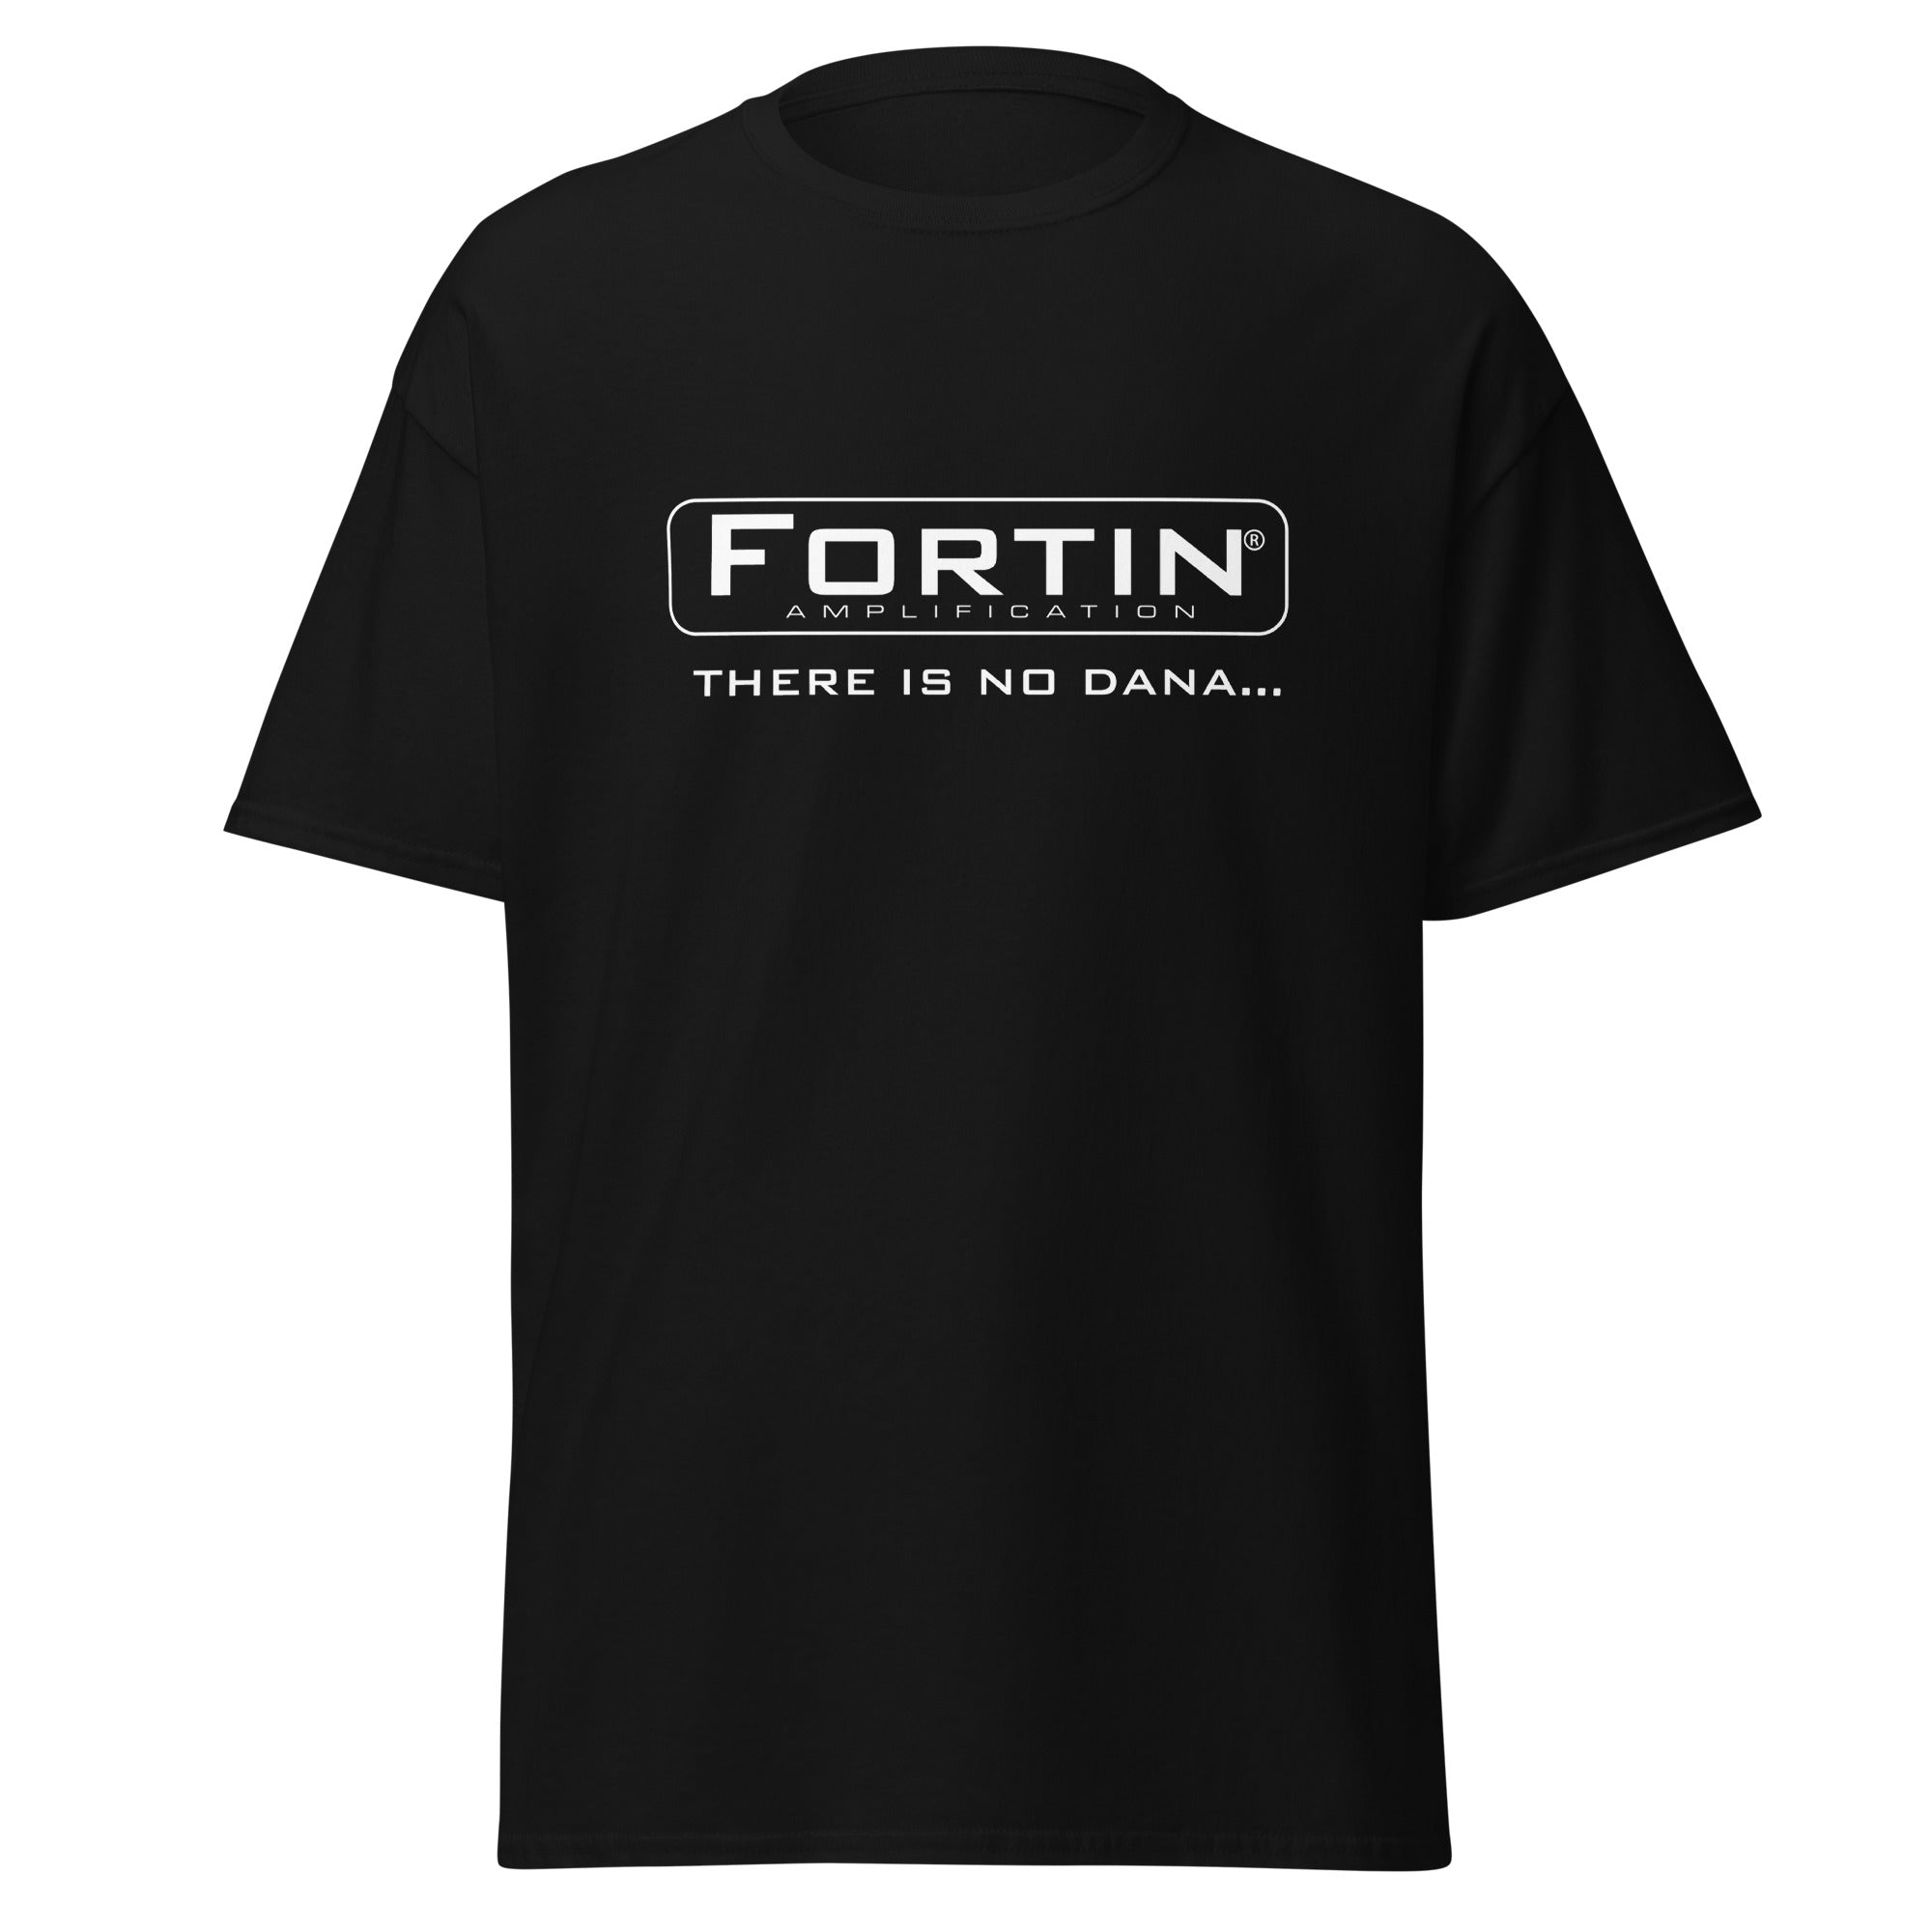 Fortin Amplification® - There in no Dana, there is only Zuul shirt